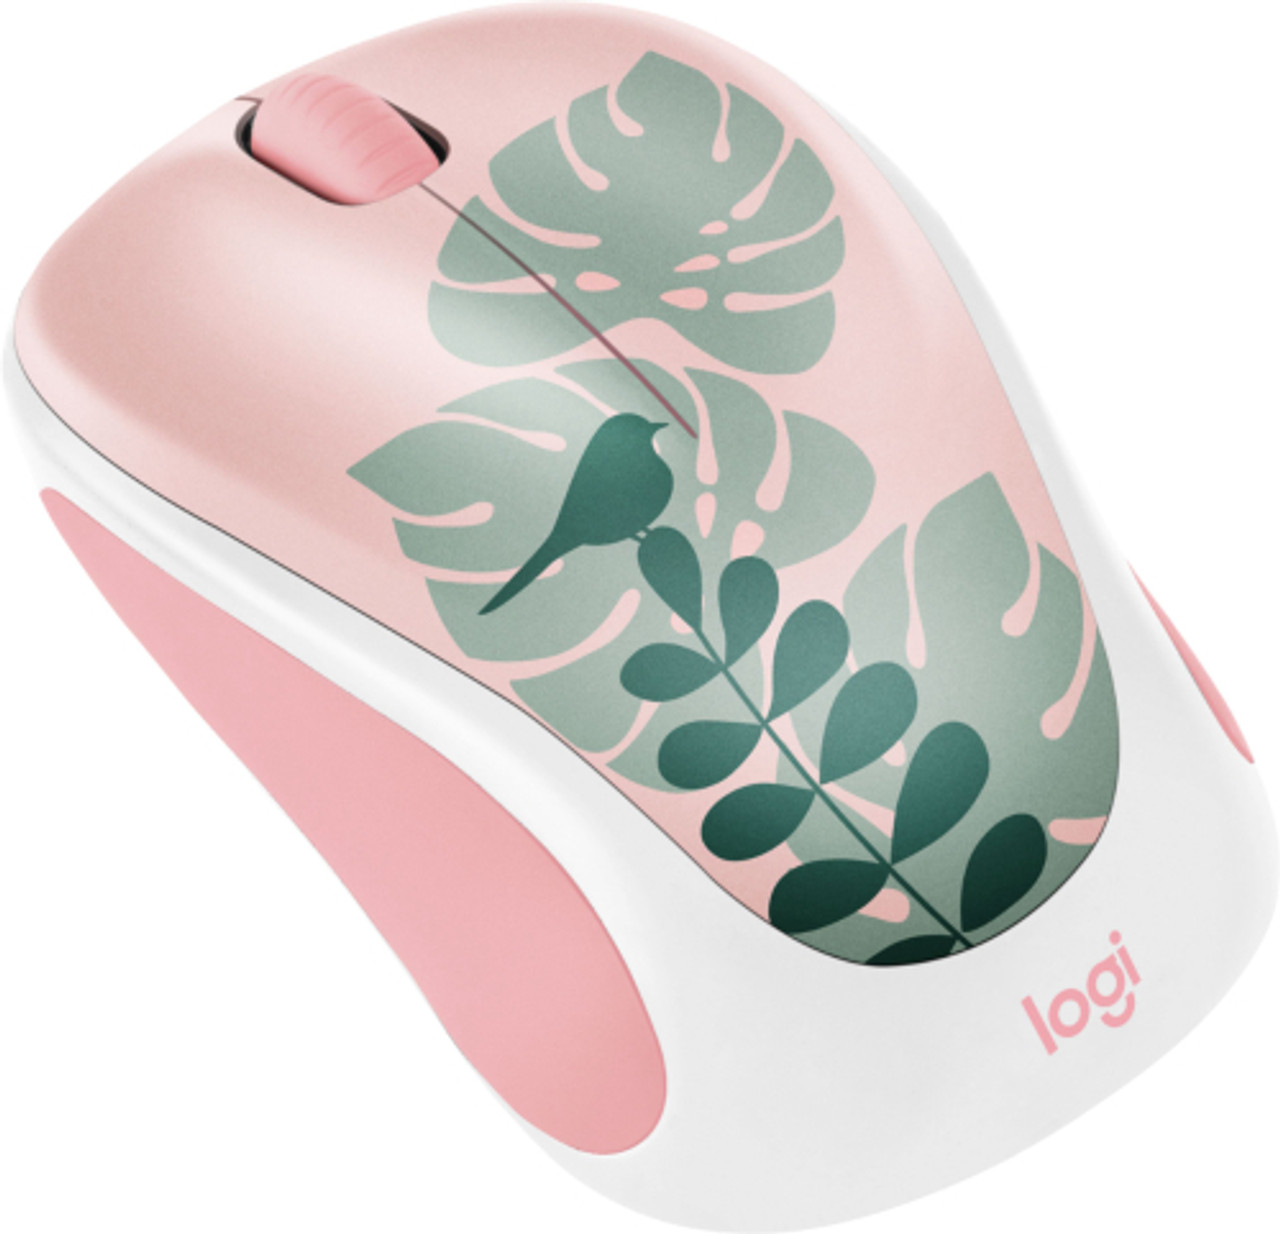 Logitech - Design Collection Limited Edition Wireless Compact Mouse with Colorful Designs - Chirpy Bird